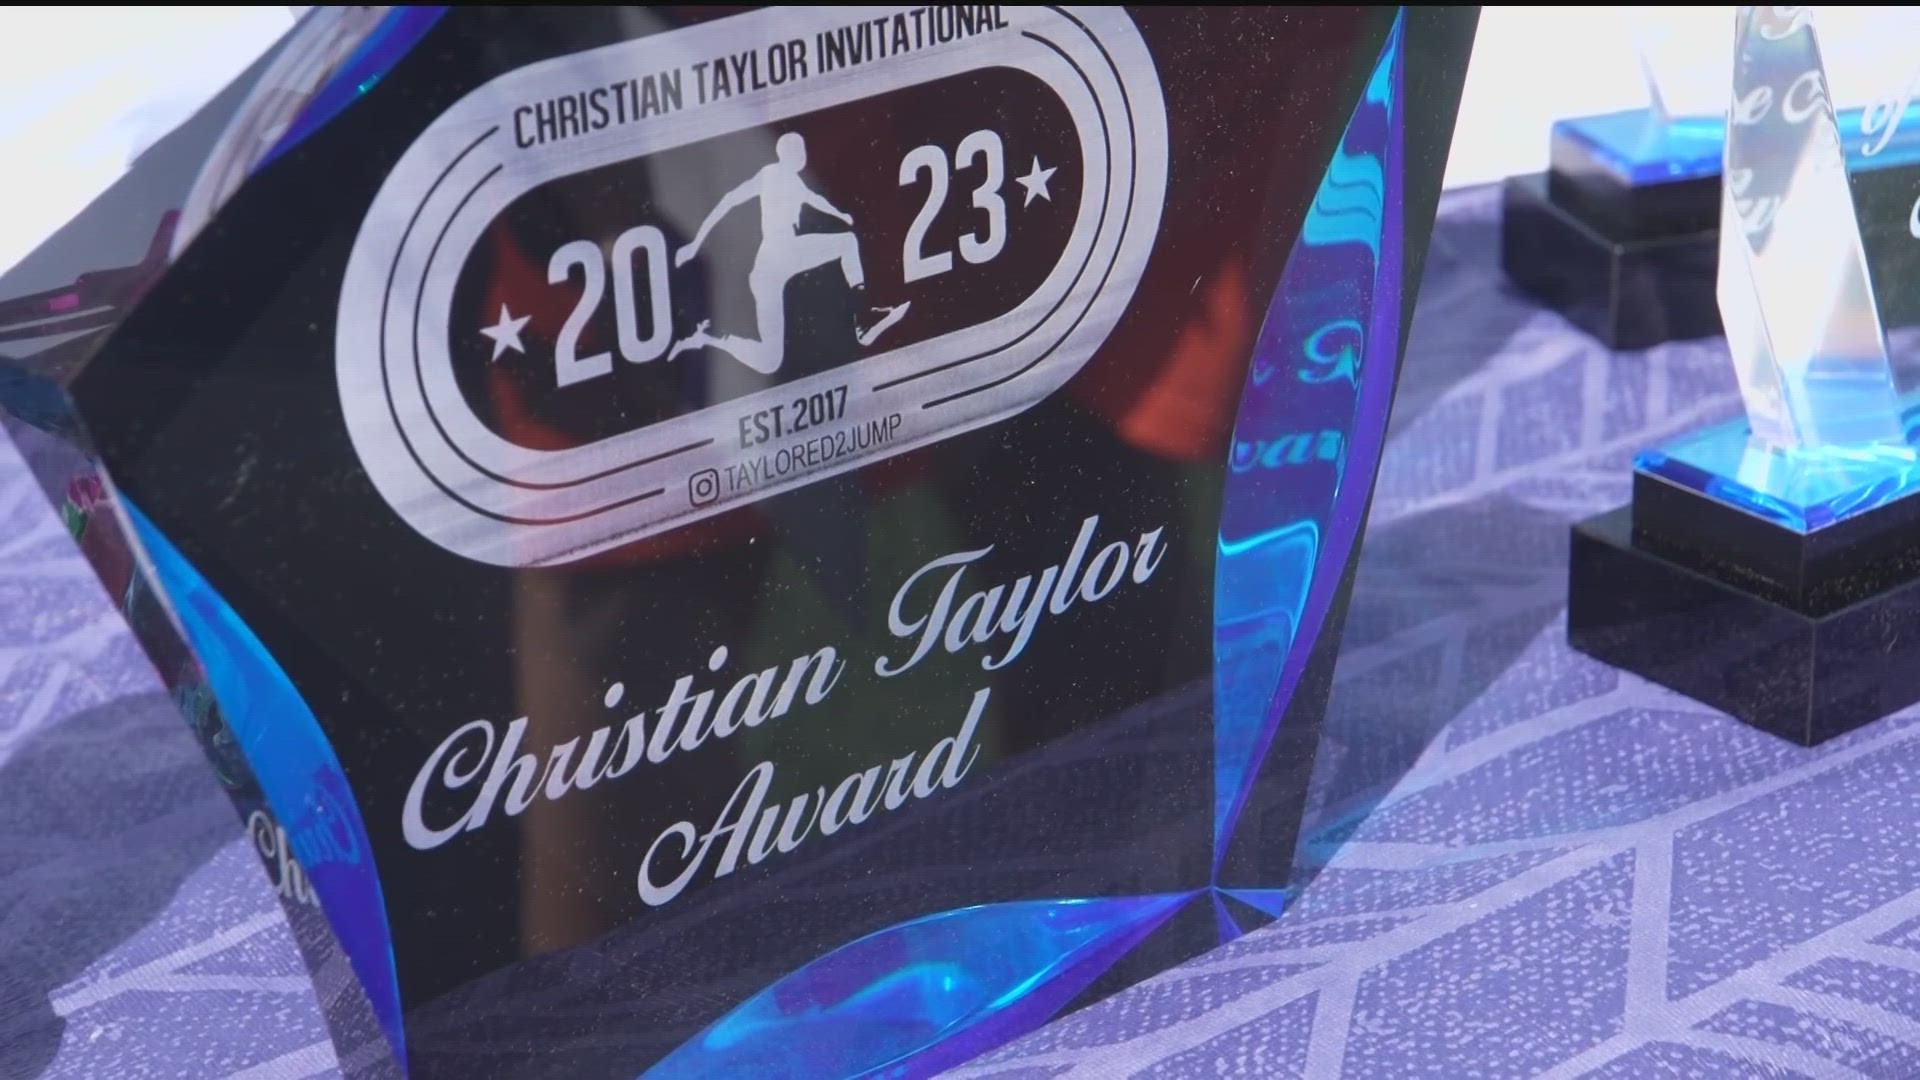 It's the seventh year that Sandy Creek High School will hold the Christian Taylor Invitation, named after and organized by the man himself.